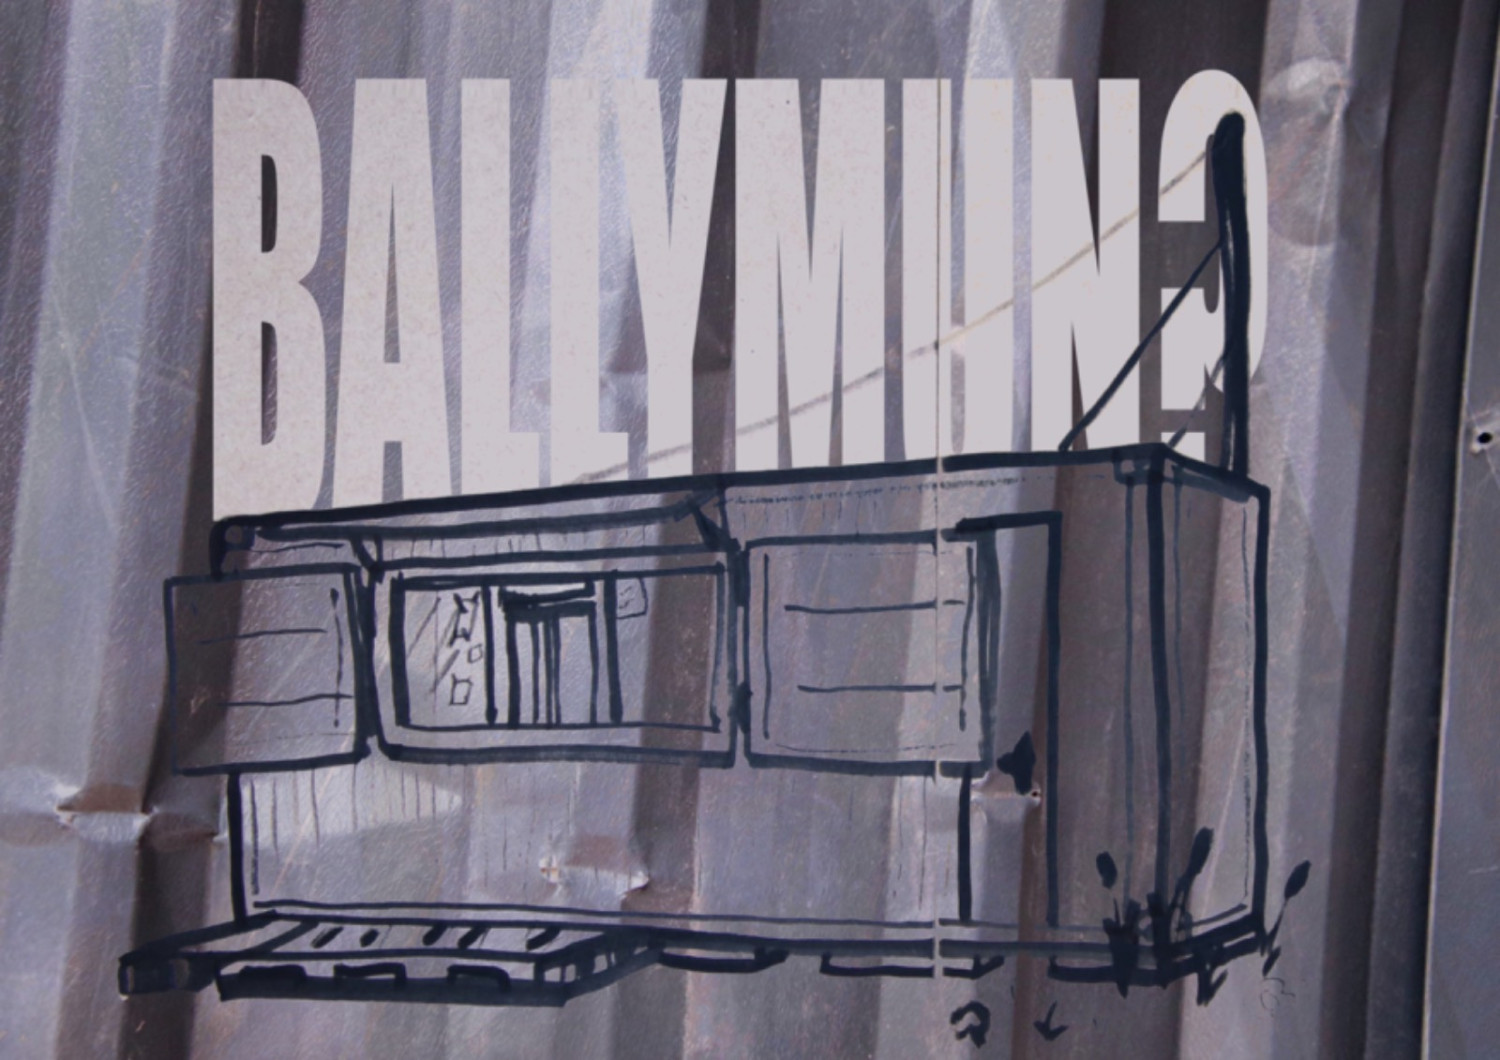 *BALLYMUN?* is a collection of stories from the community of Ballymun. It tells a personal history of the area through sound and print